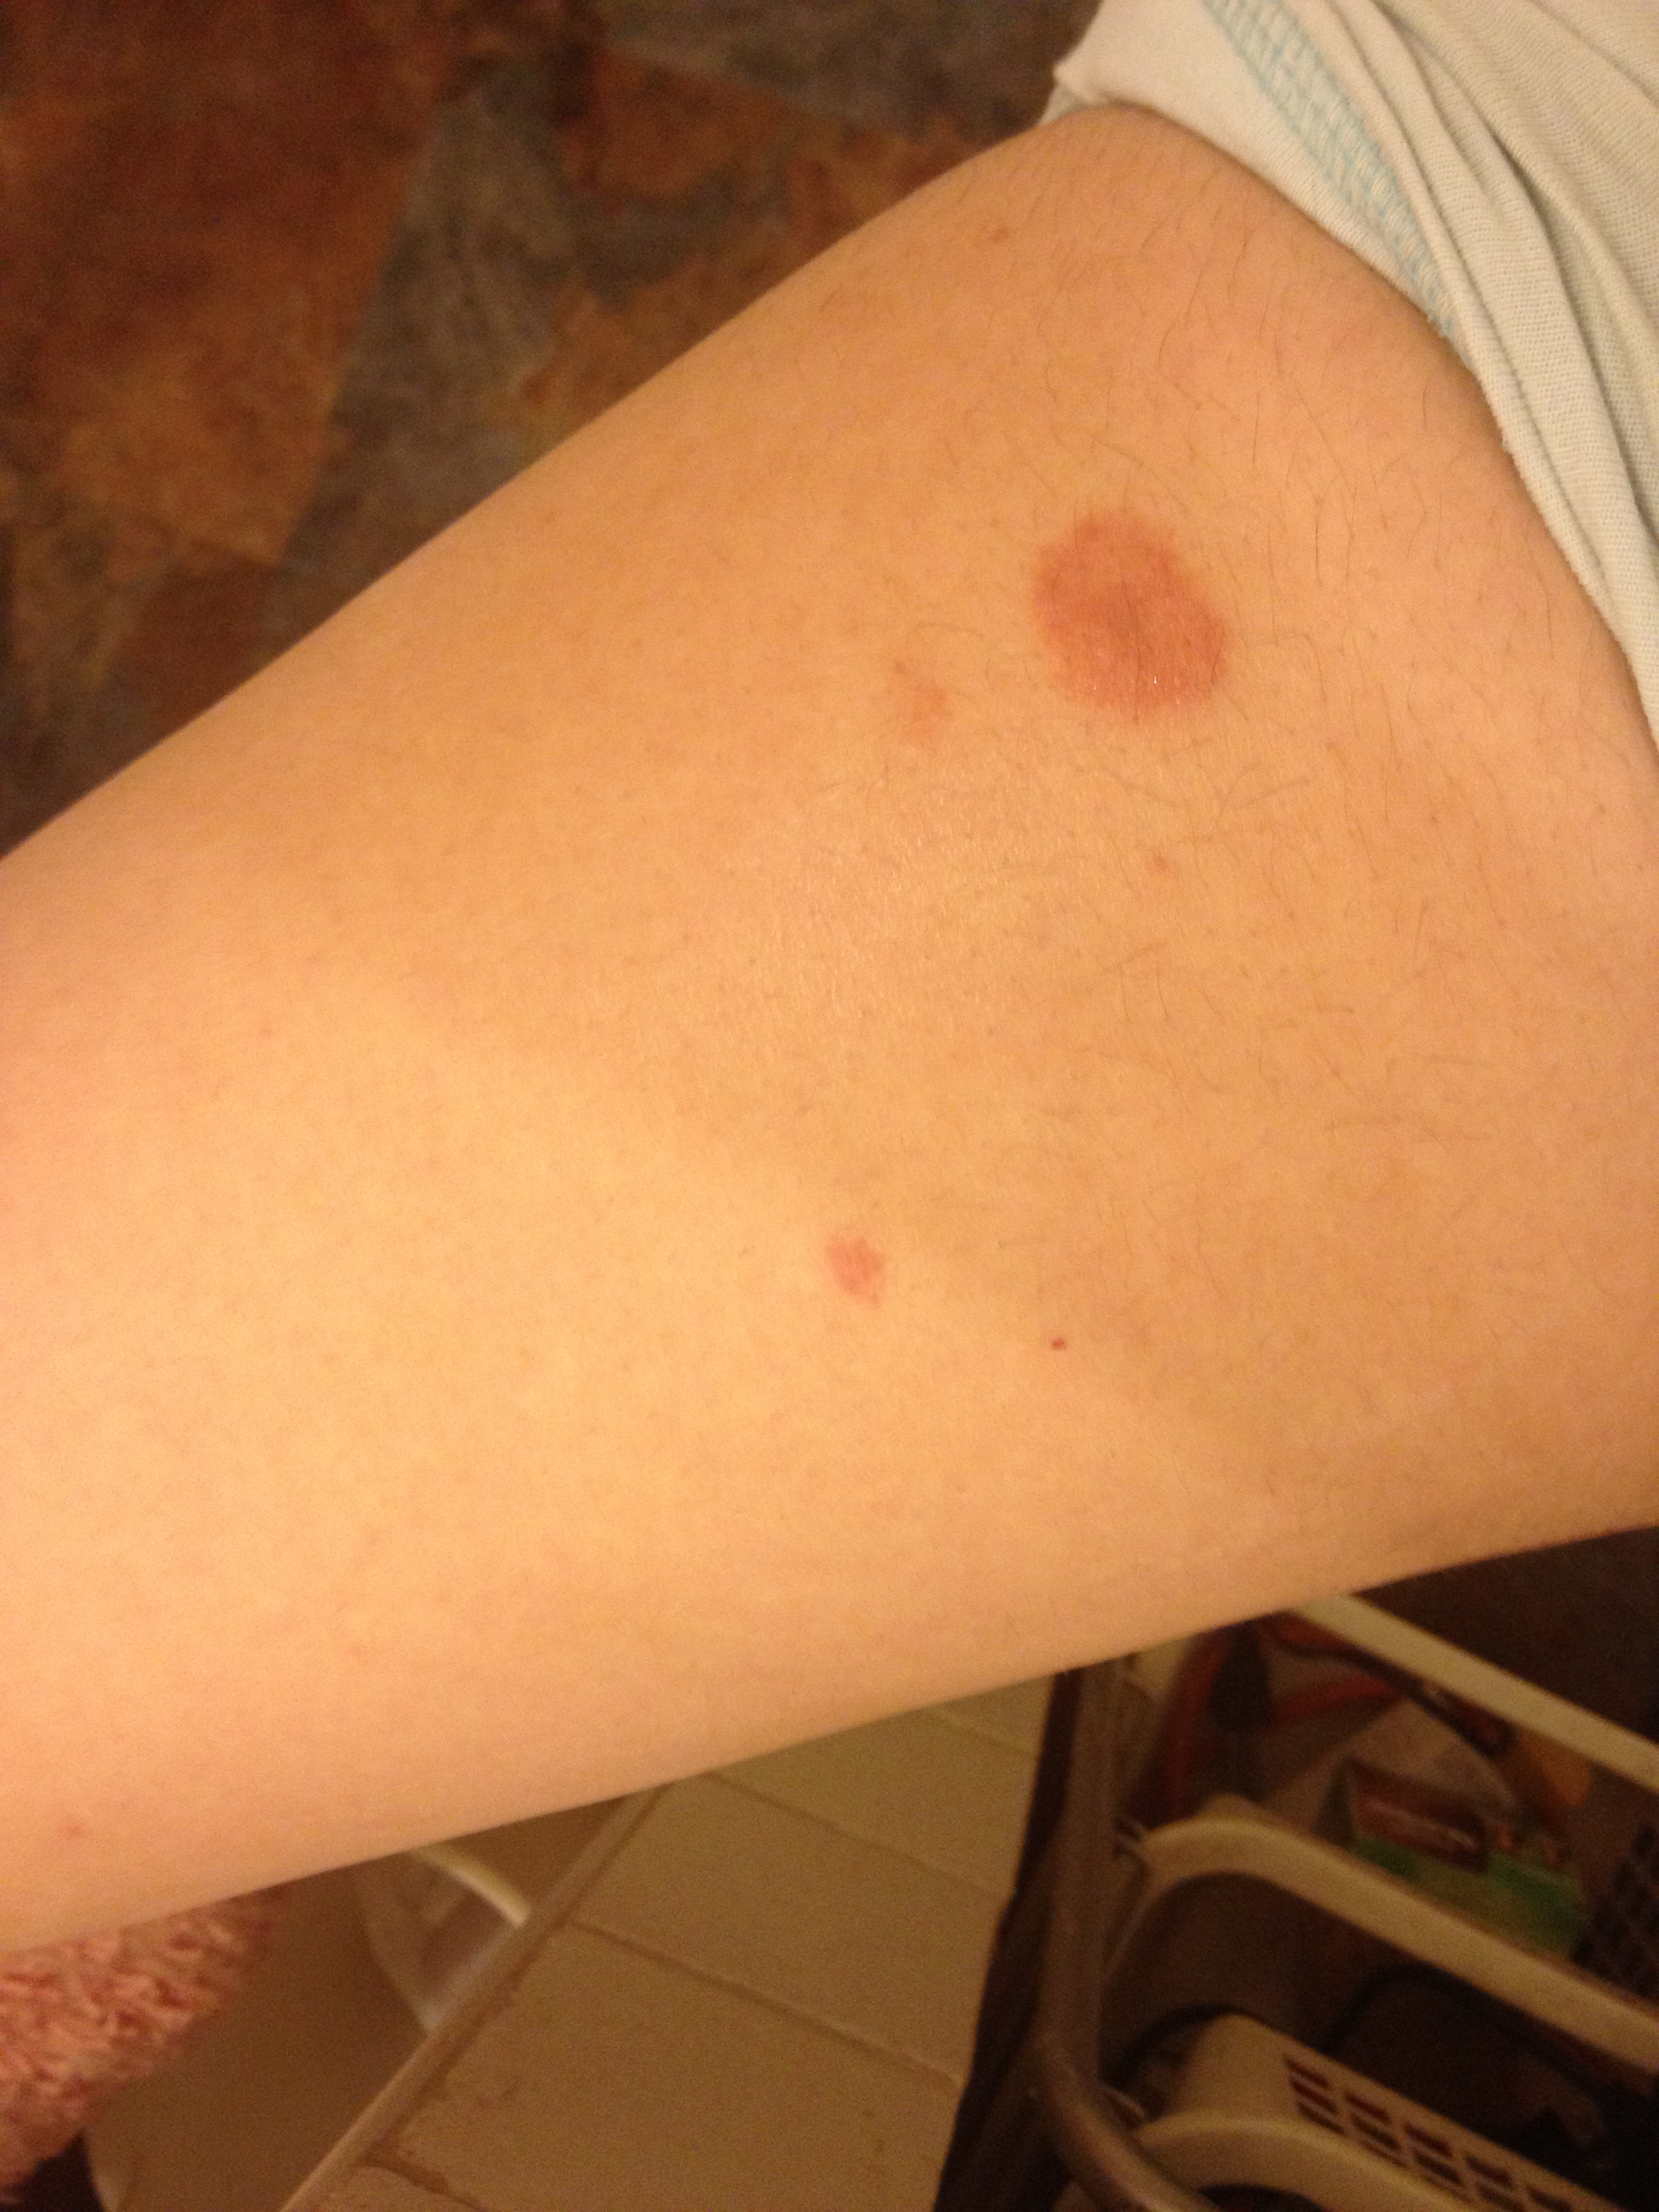 Pityriasis Rosea - American Family Physician